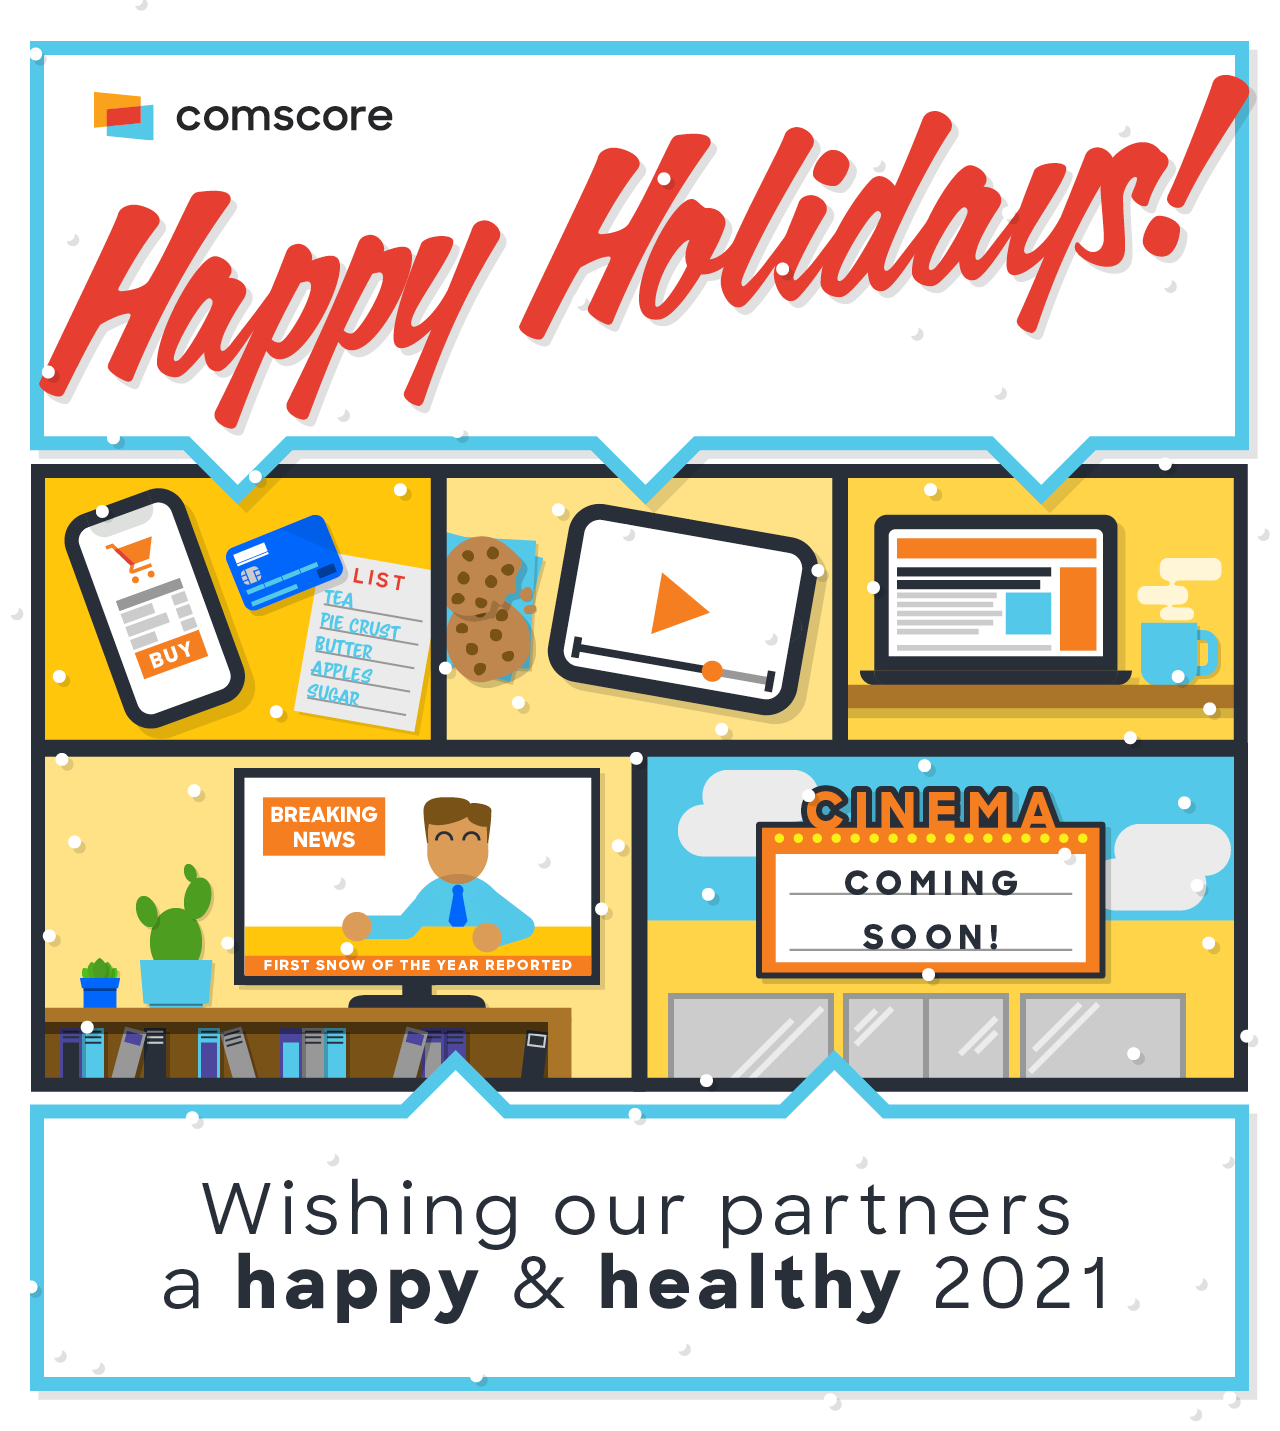 Happy Holiday - From your partners at Comscore